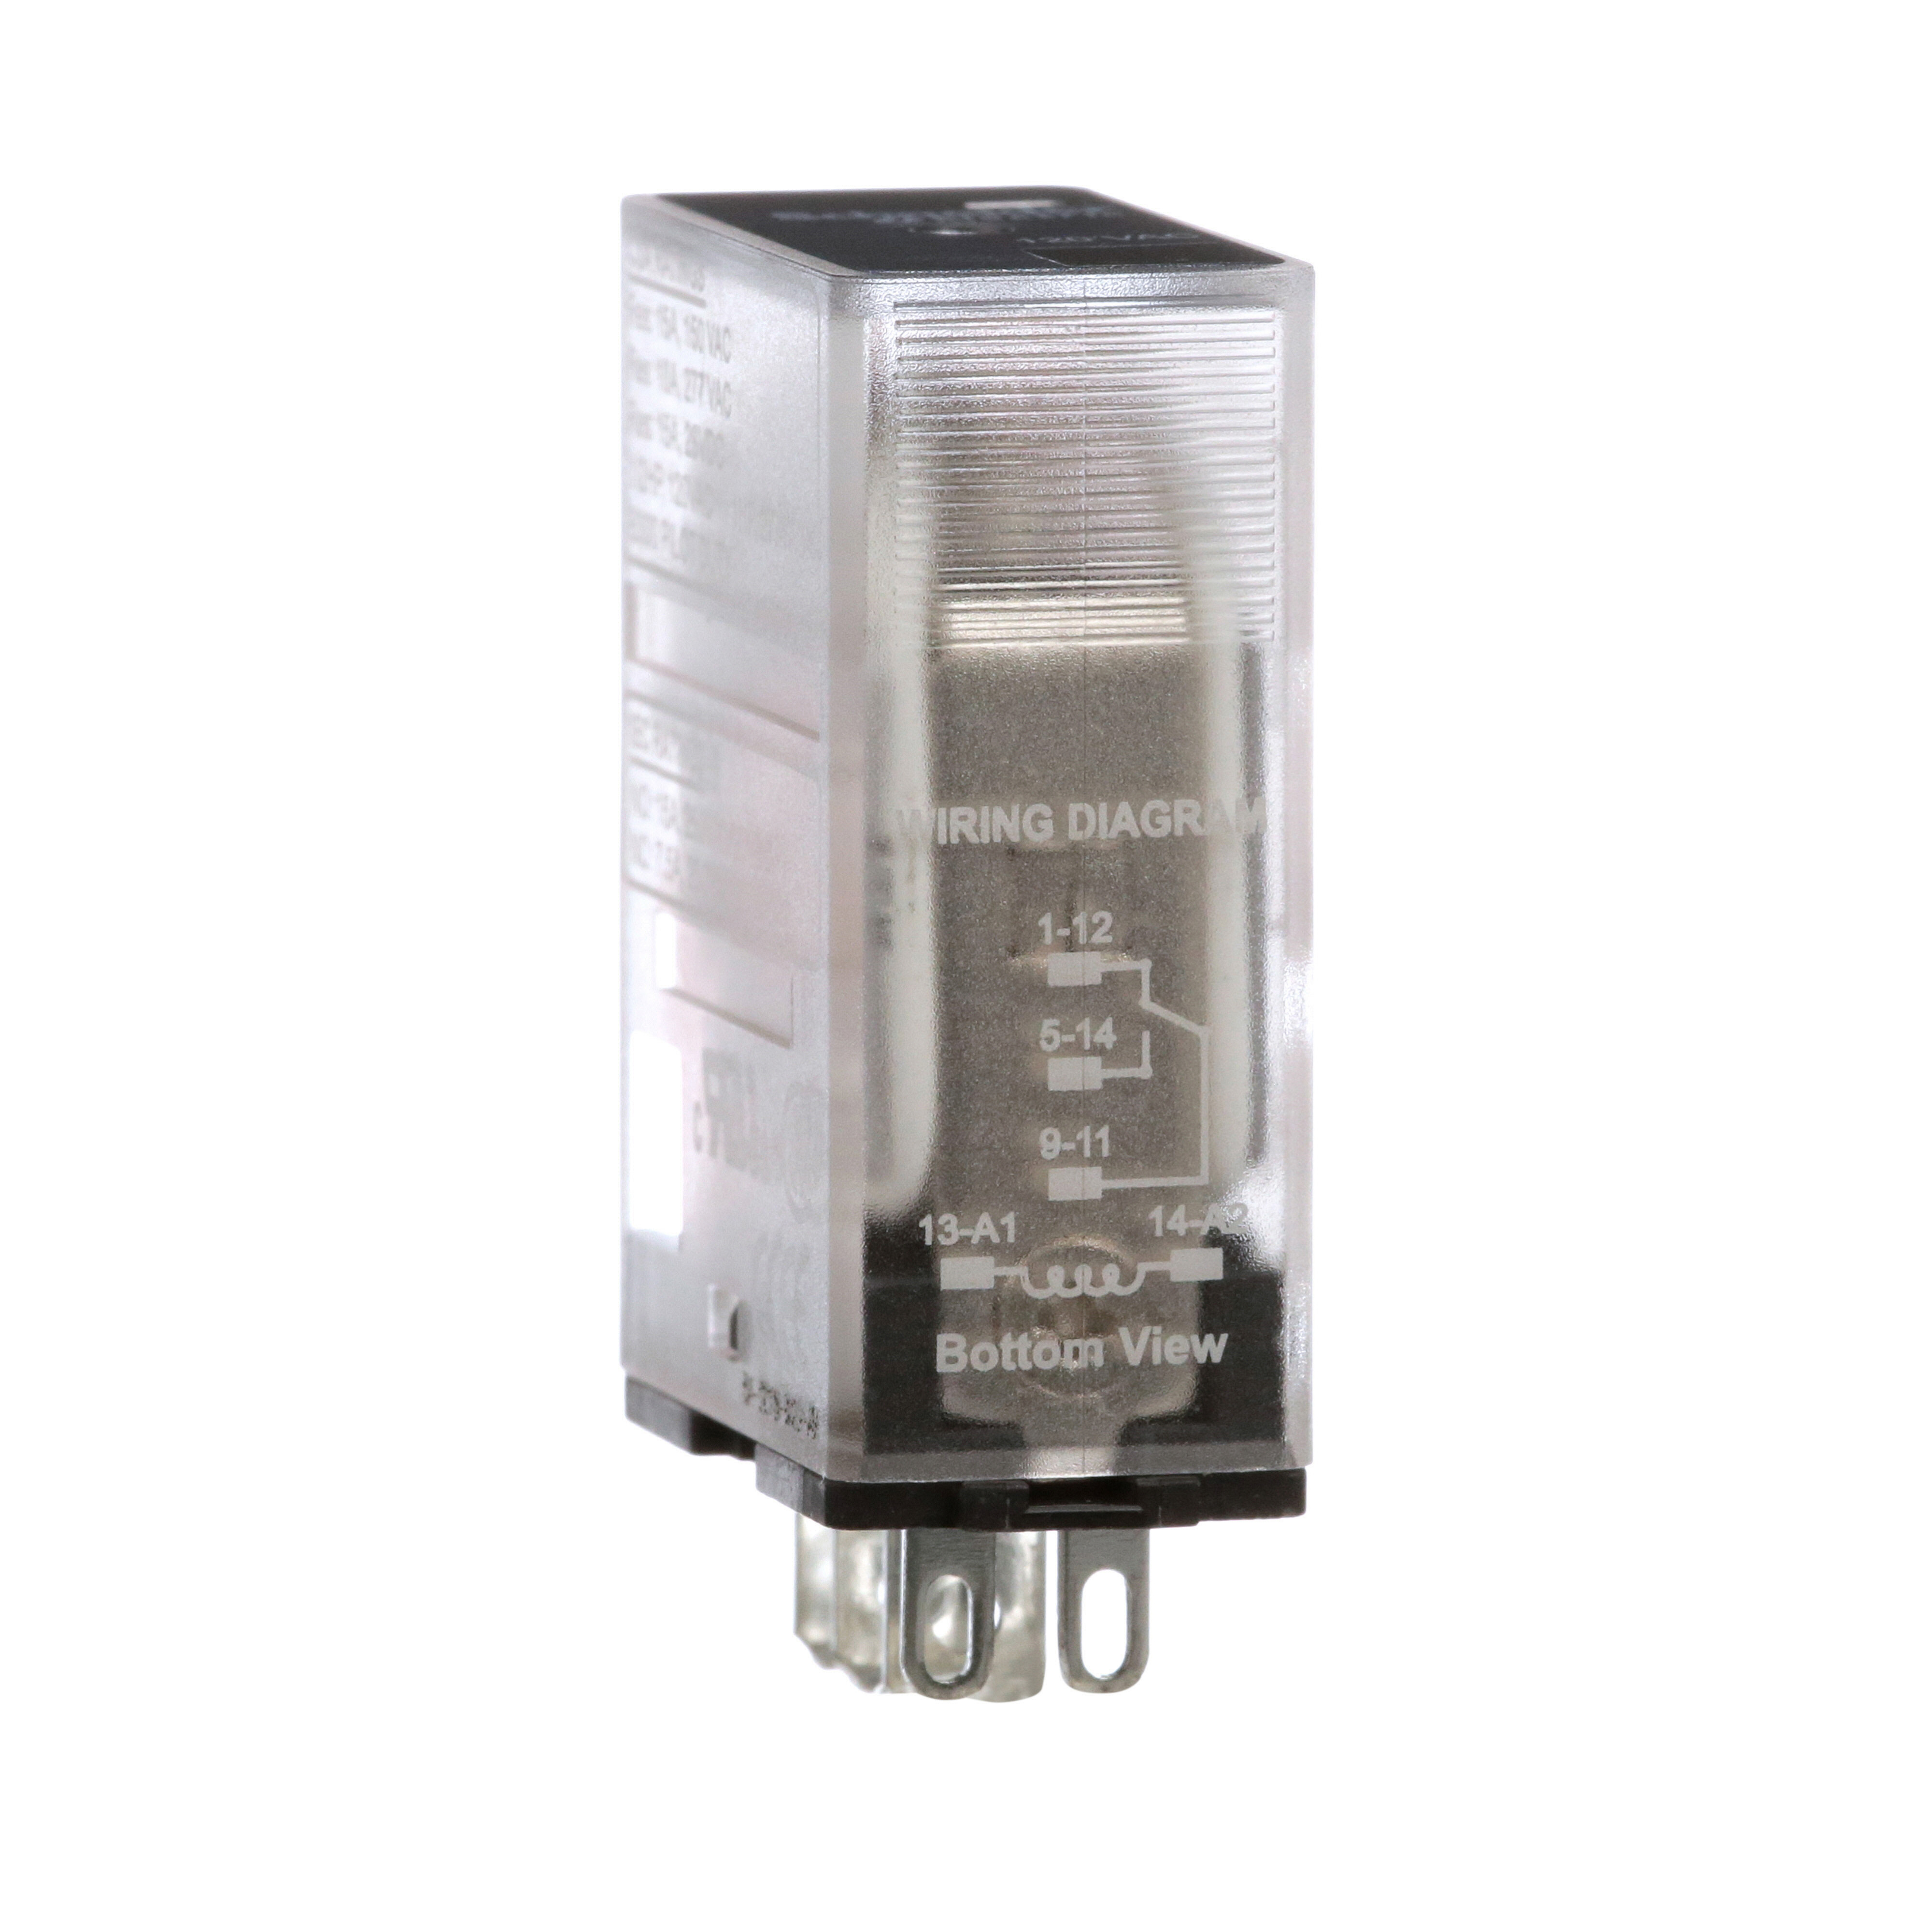 Power relay, SE Relays, 15A, SPDT, 120 VAC, clear cover